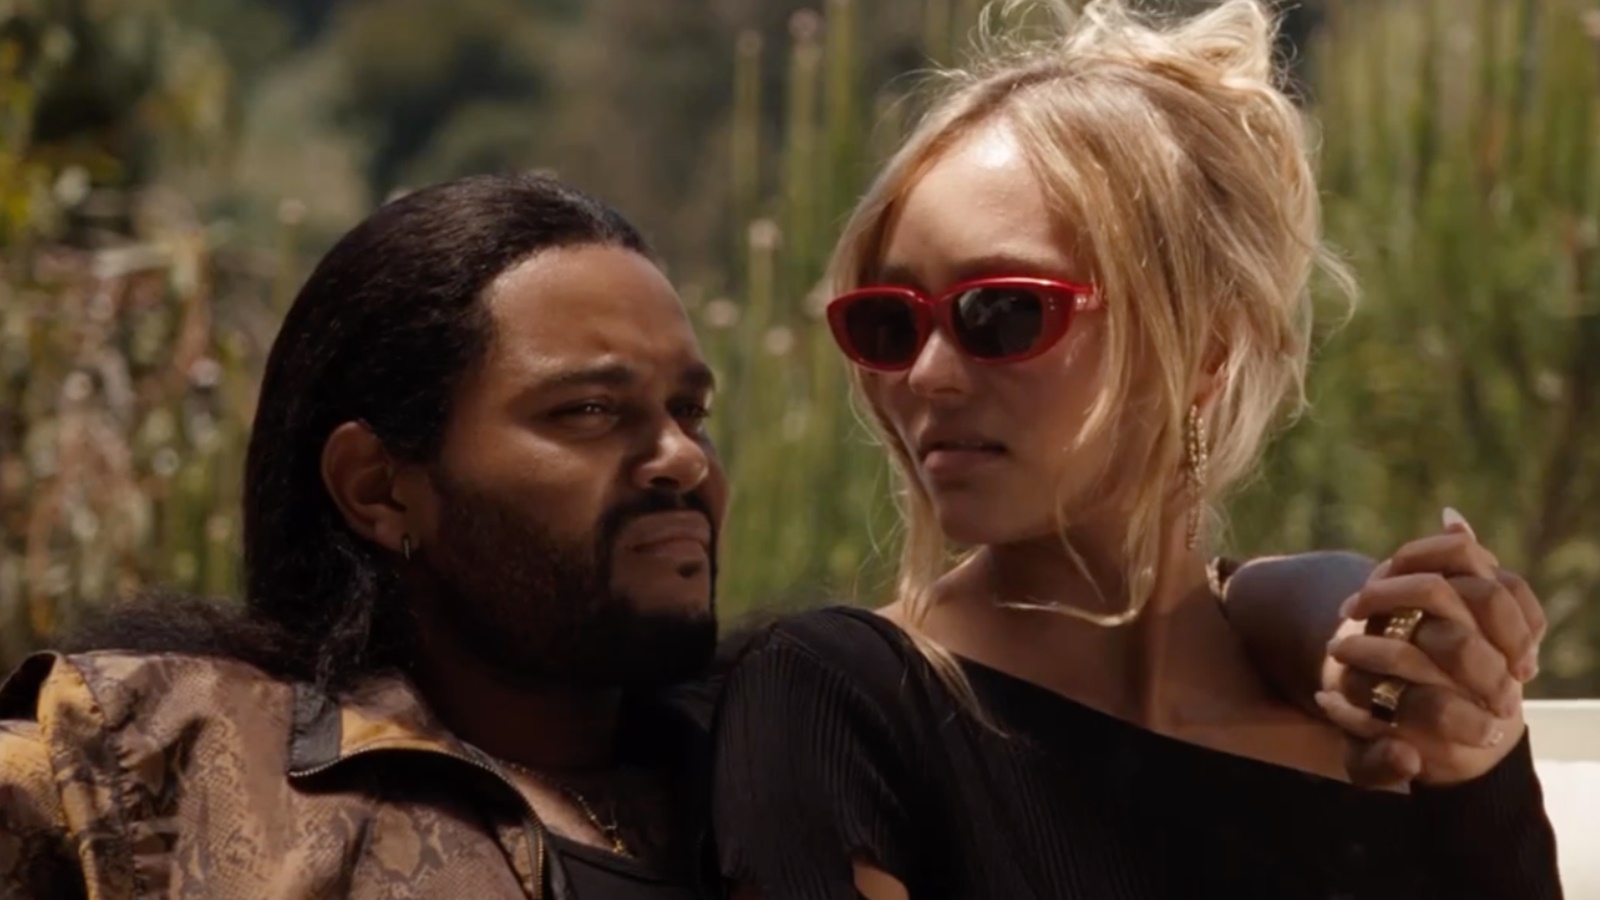 Cannes 2023: The Idol series with stars Lily-Rose Depp and The Weeknd arrives at the festival